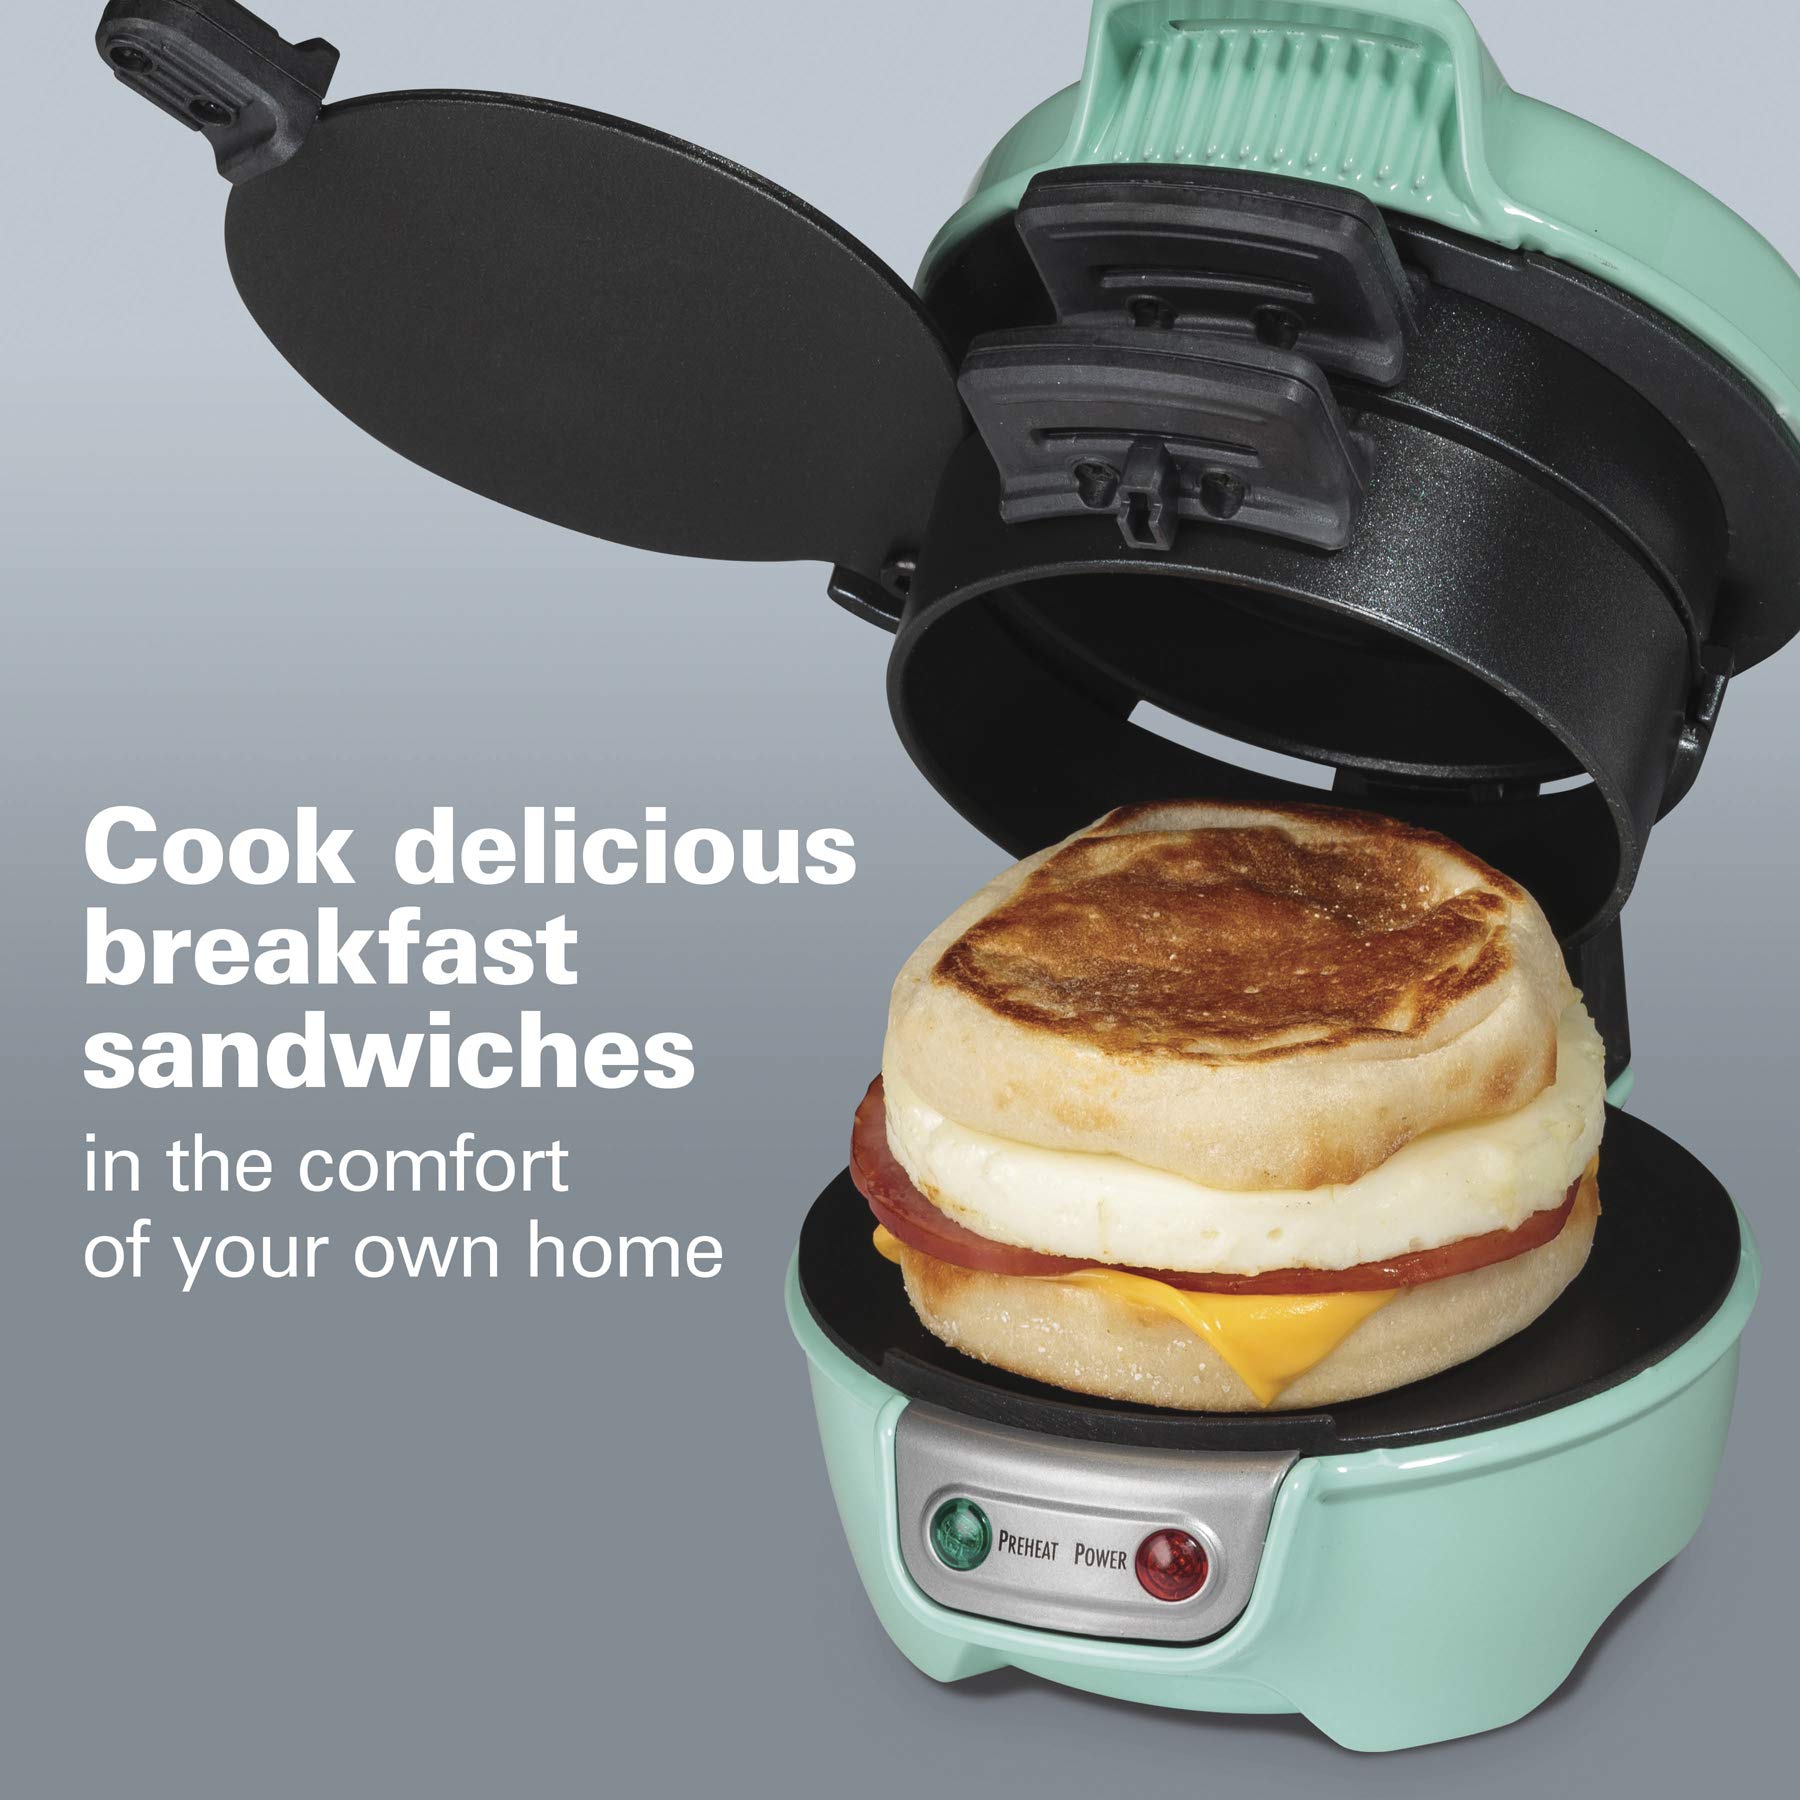 Hamilton Beach Breakfast Sandwich Maker with Egg Cooker Ring, Customize Ingredients, Perfect for English Muffins, Croissants, Mini Waffles, Dorm Room Essentials, Mint (25482)